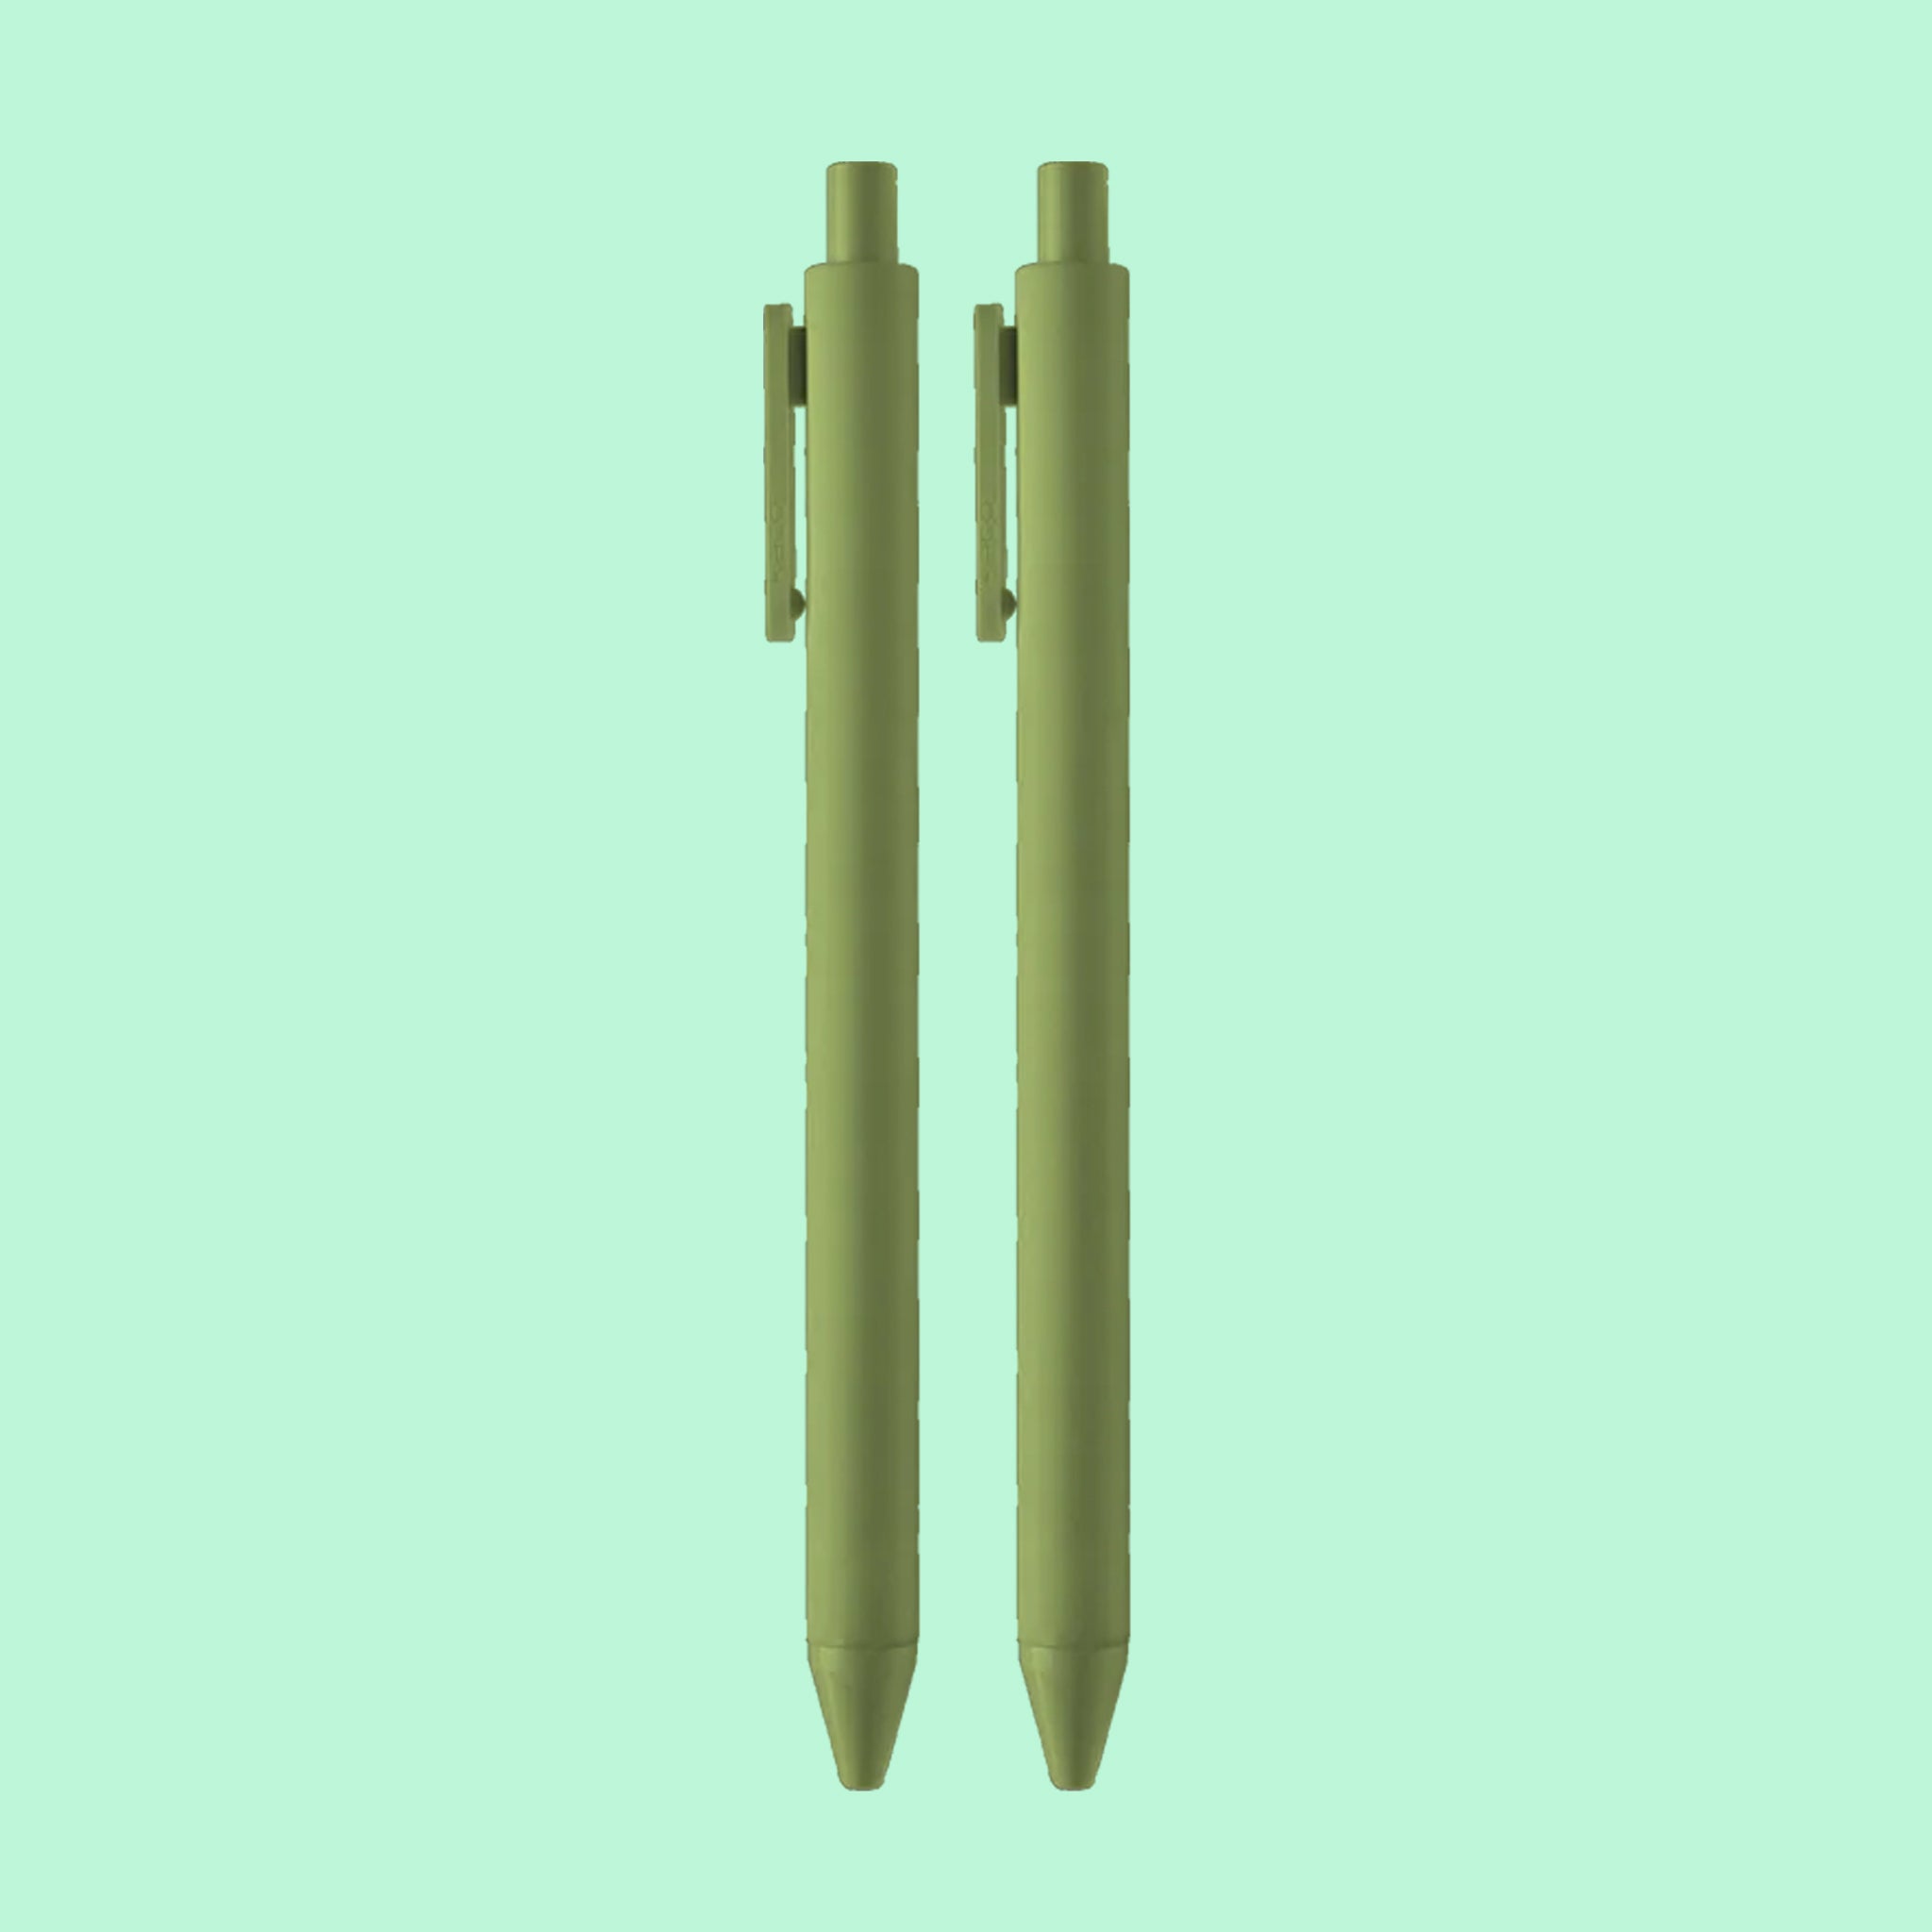 On a green background is an olive green pen set. 